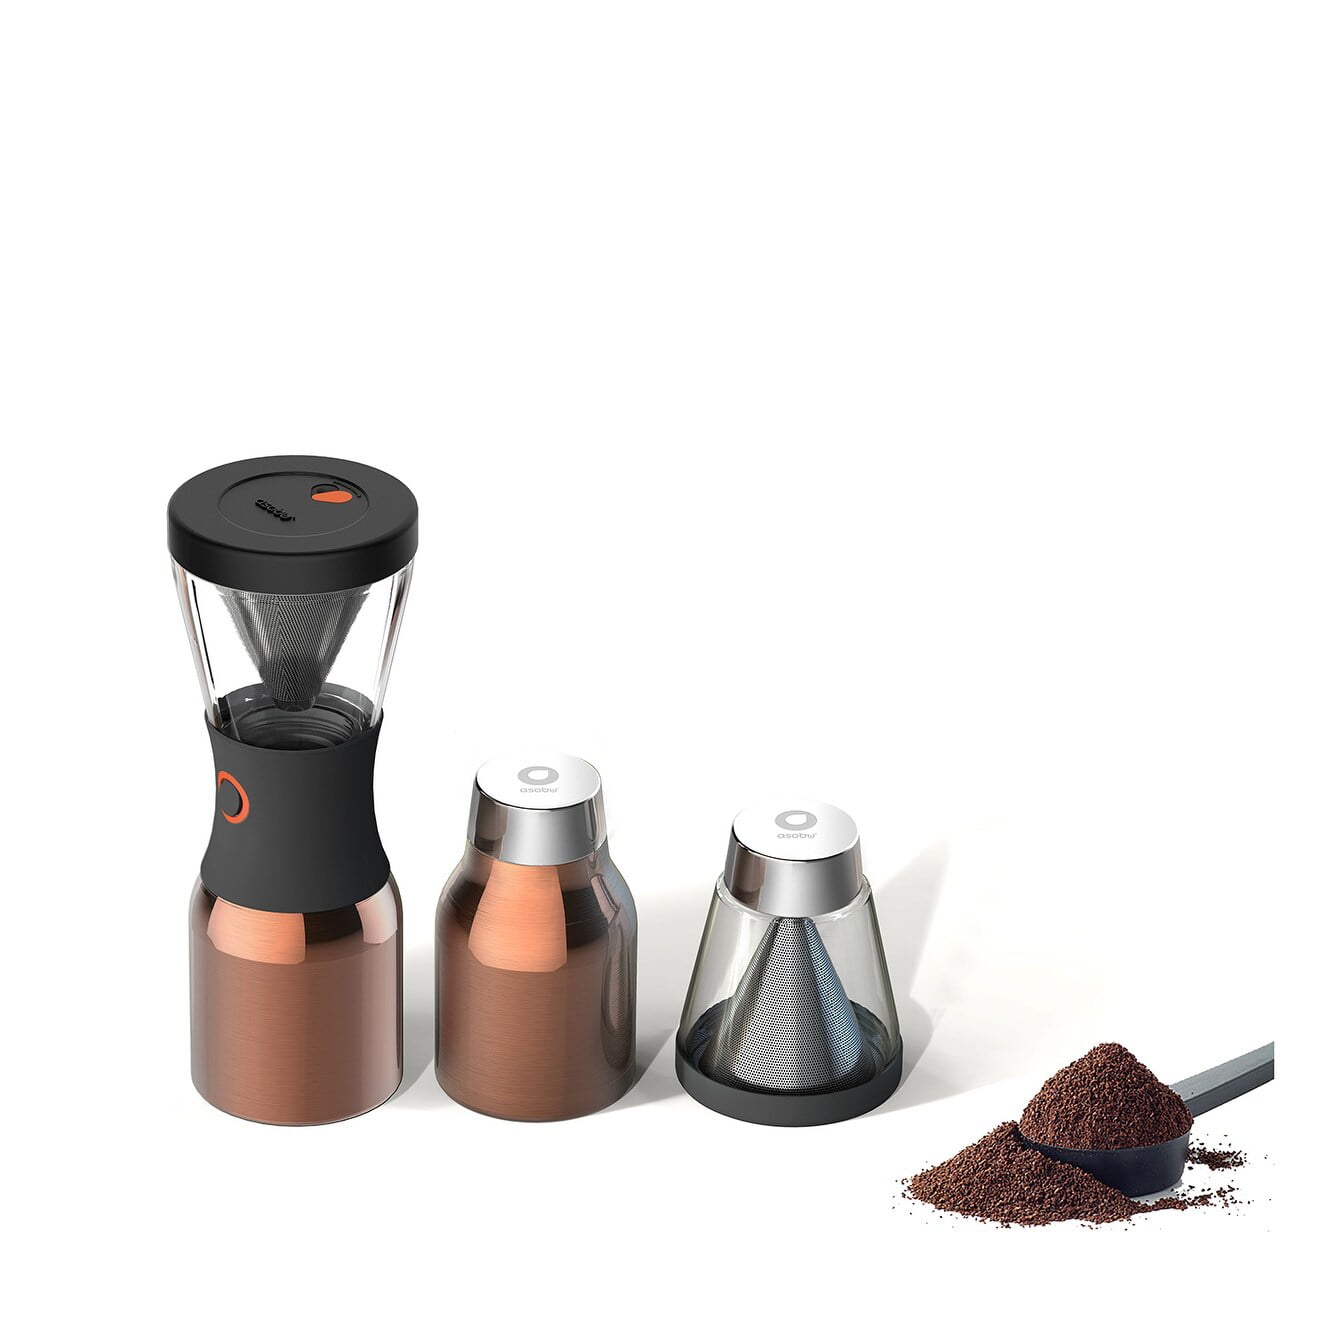 Asobu cold brew coffee maker - appliances - by owner - sale